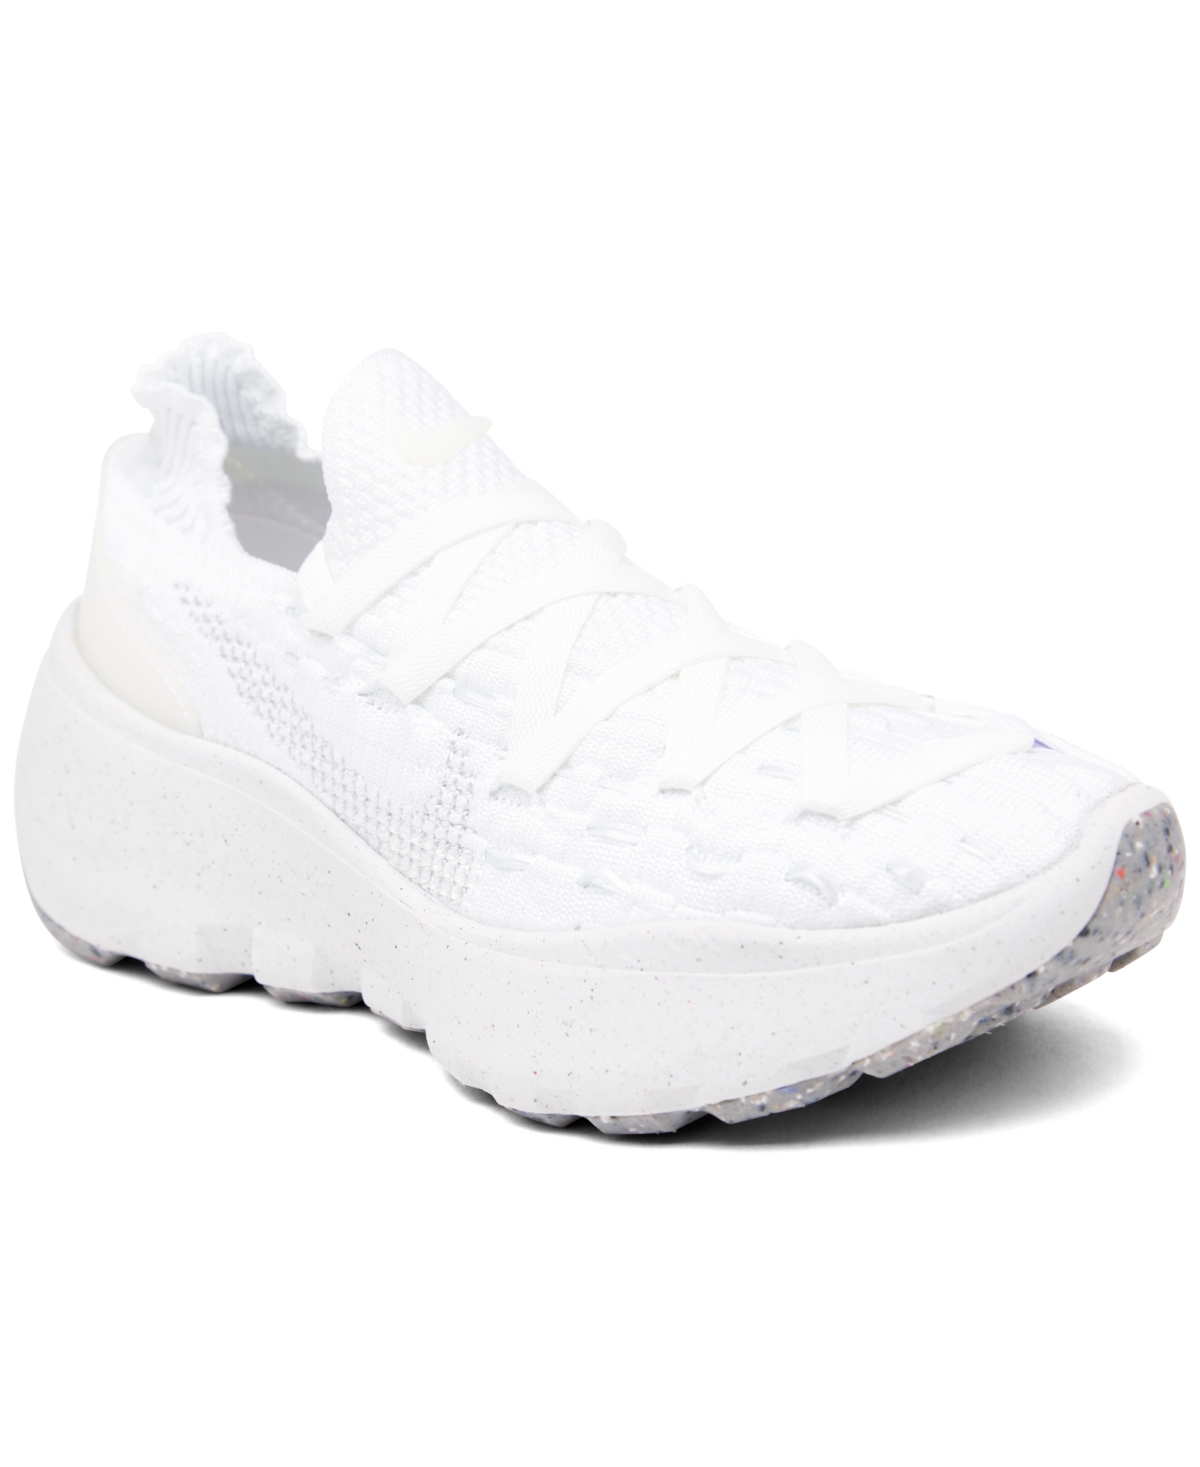 NIKE WOMEN'S SPACE HIPPIE 04 CASUAL SNEAKERS FROM FINISH LINE